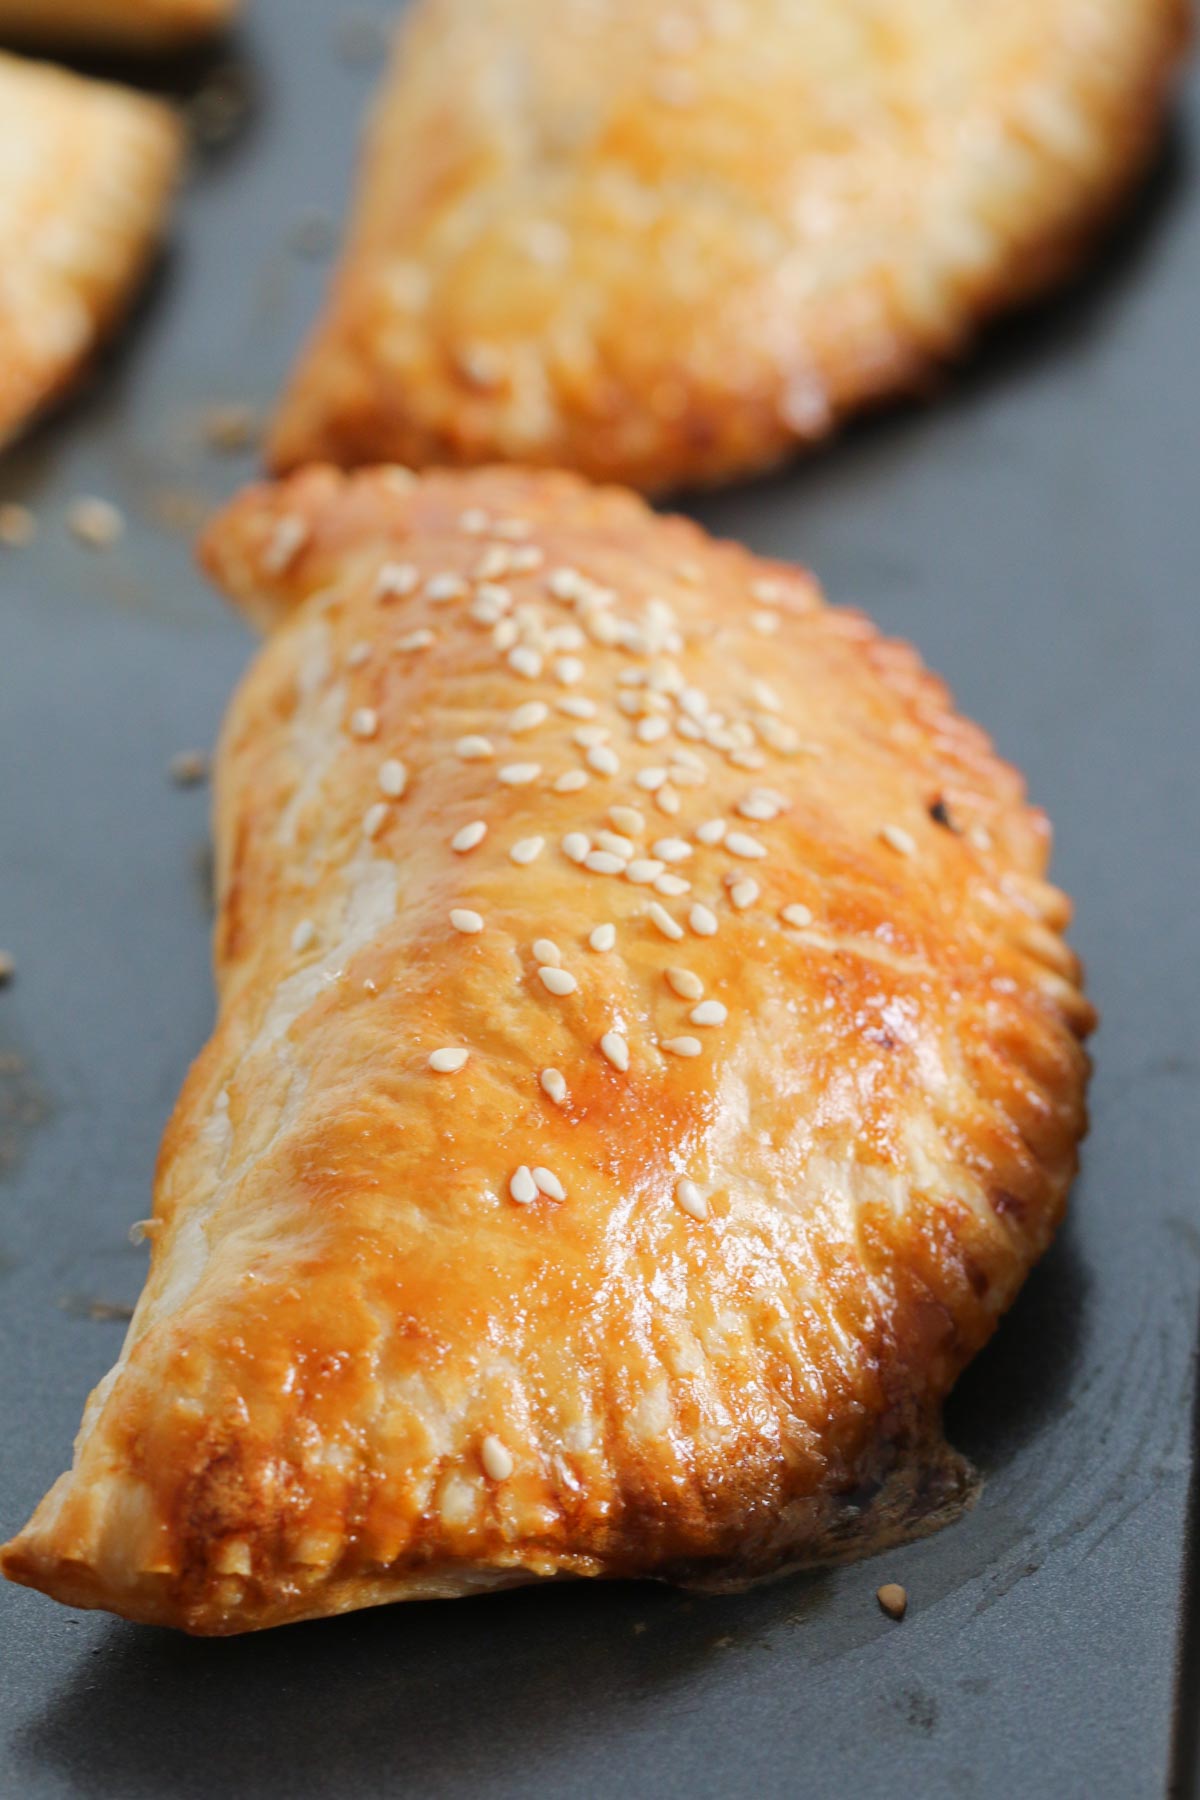 A close up of golden brown, sesame sprinkled, pasties on a baking tray